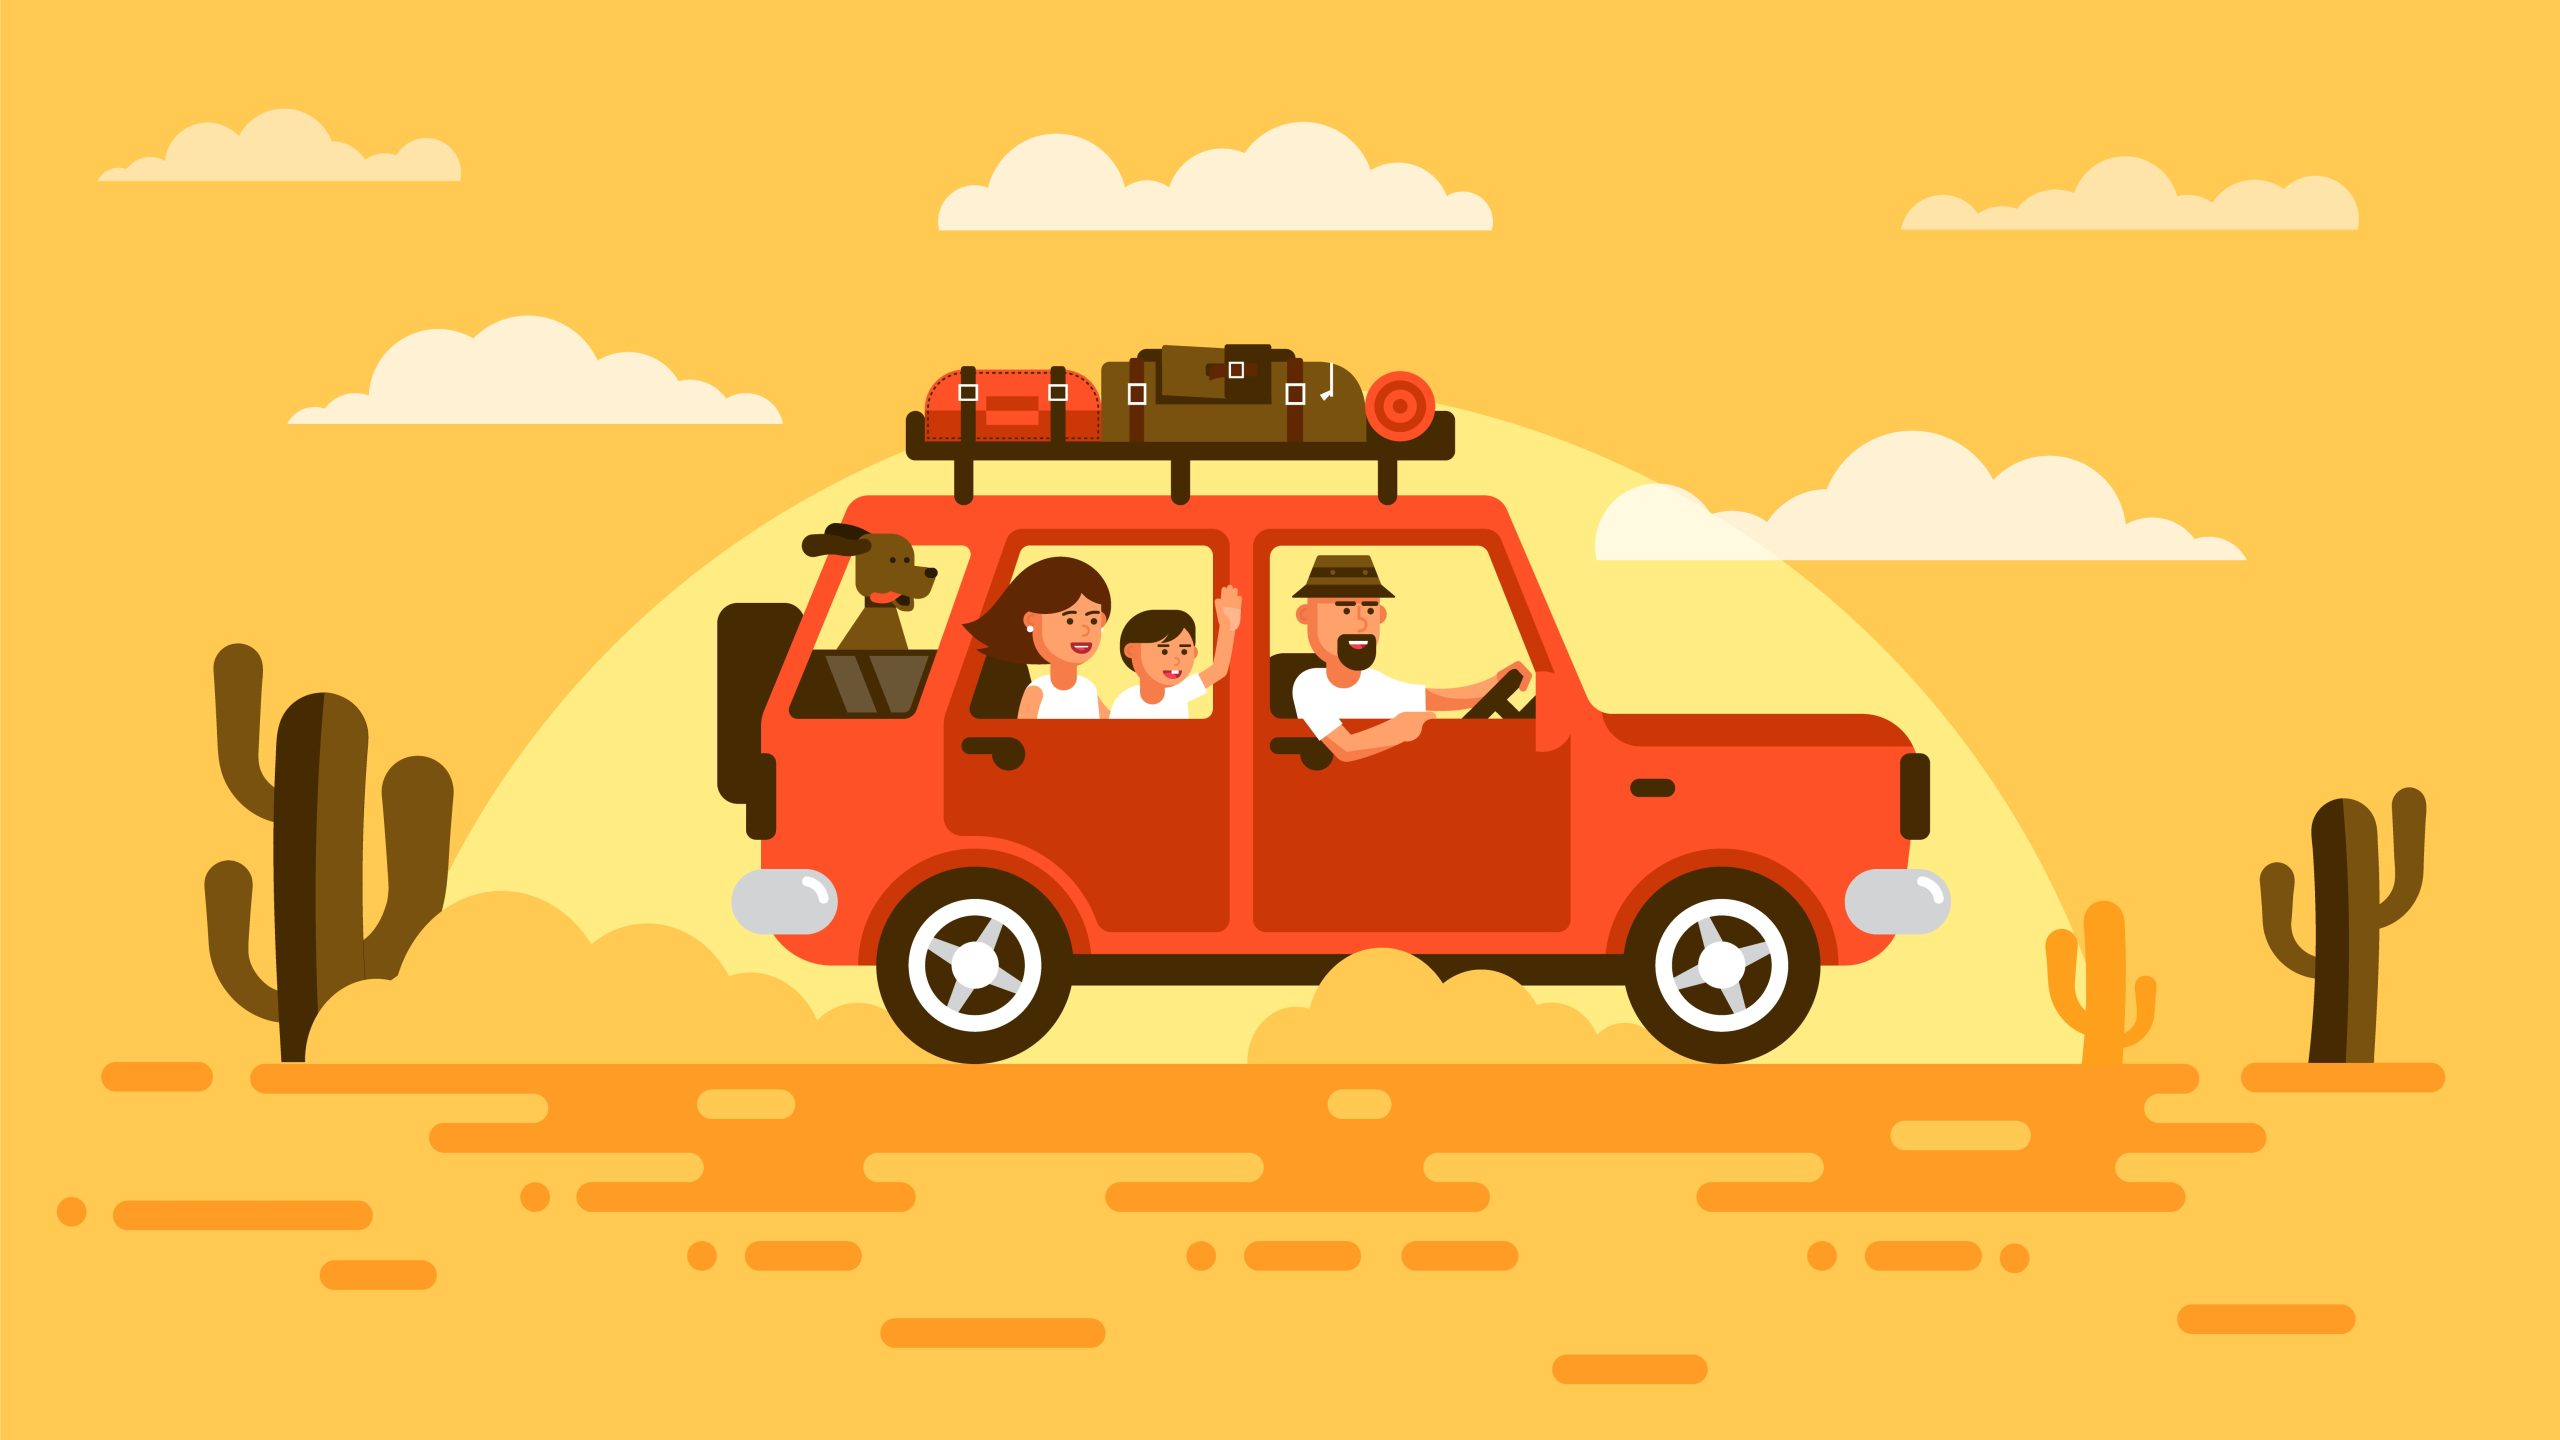 Family travels by car with a dog. SUV with passengers and luggage rides through the desert of the southern states.